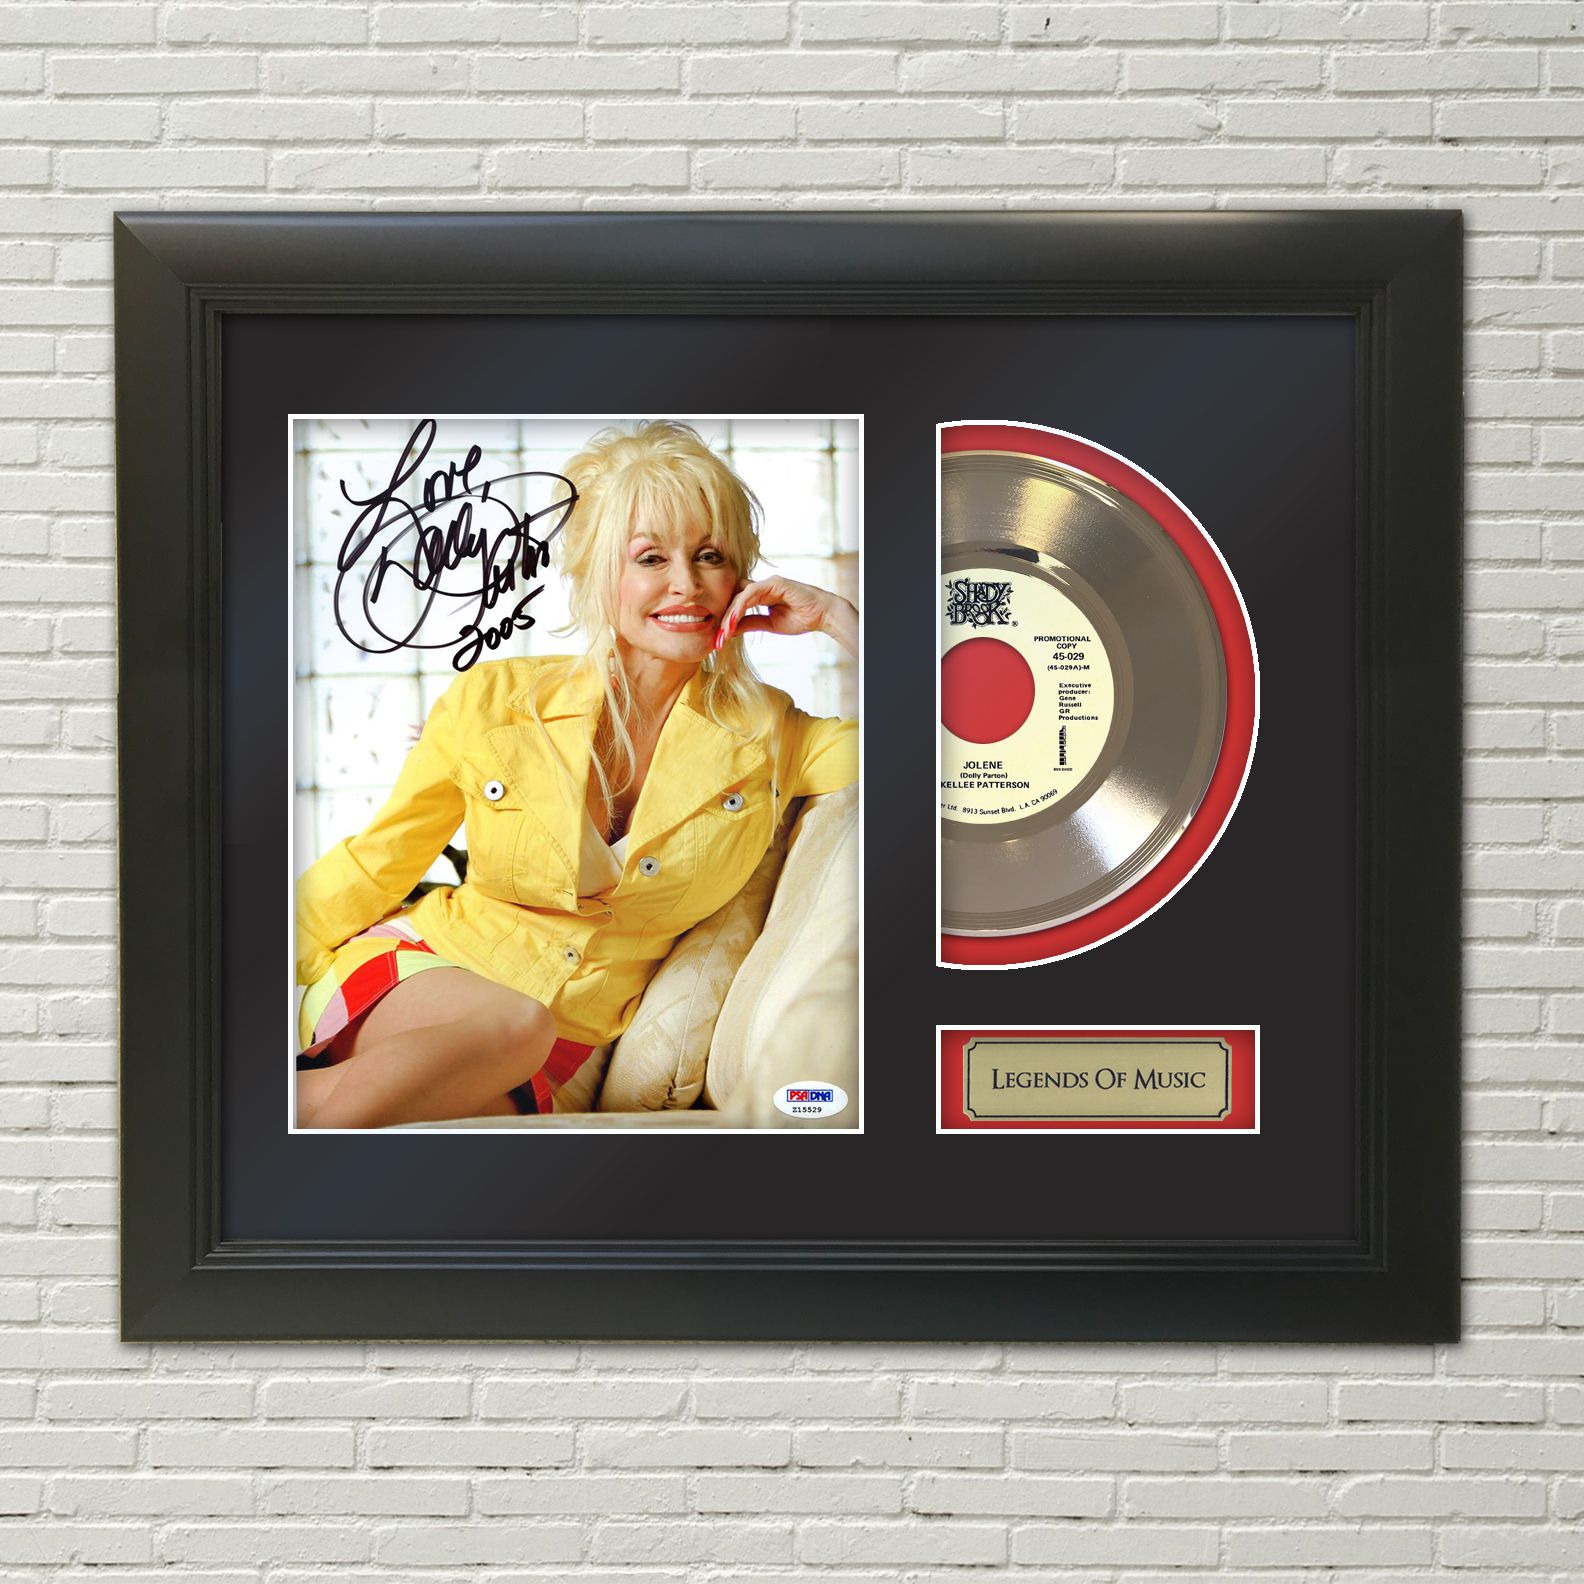 Dolly Parton Jolene Reproduction Signature Framed 45 Gold Record Display M4 Gold Record Outlet Album And Disc Collectible Memorabilia